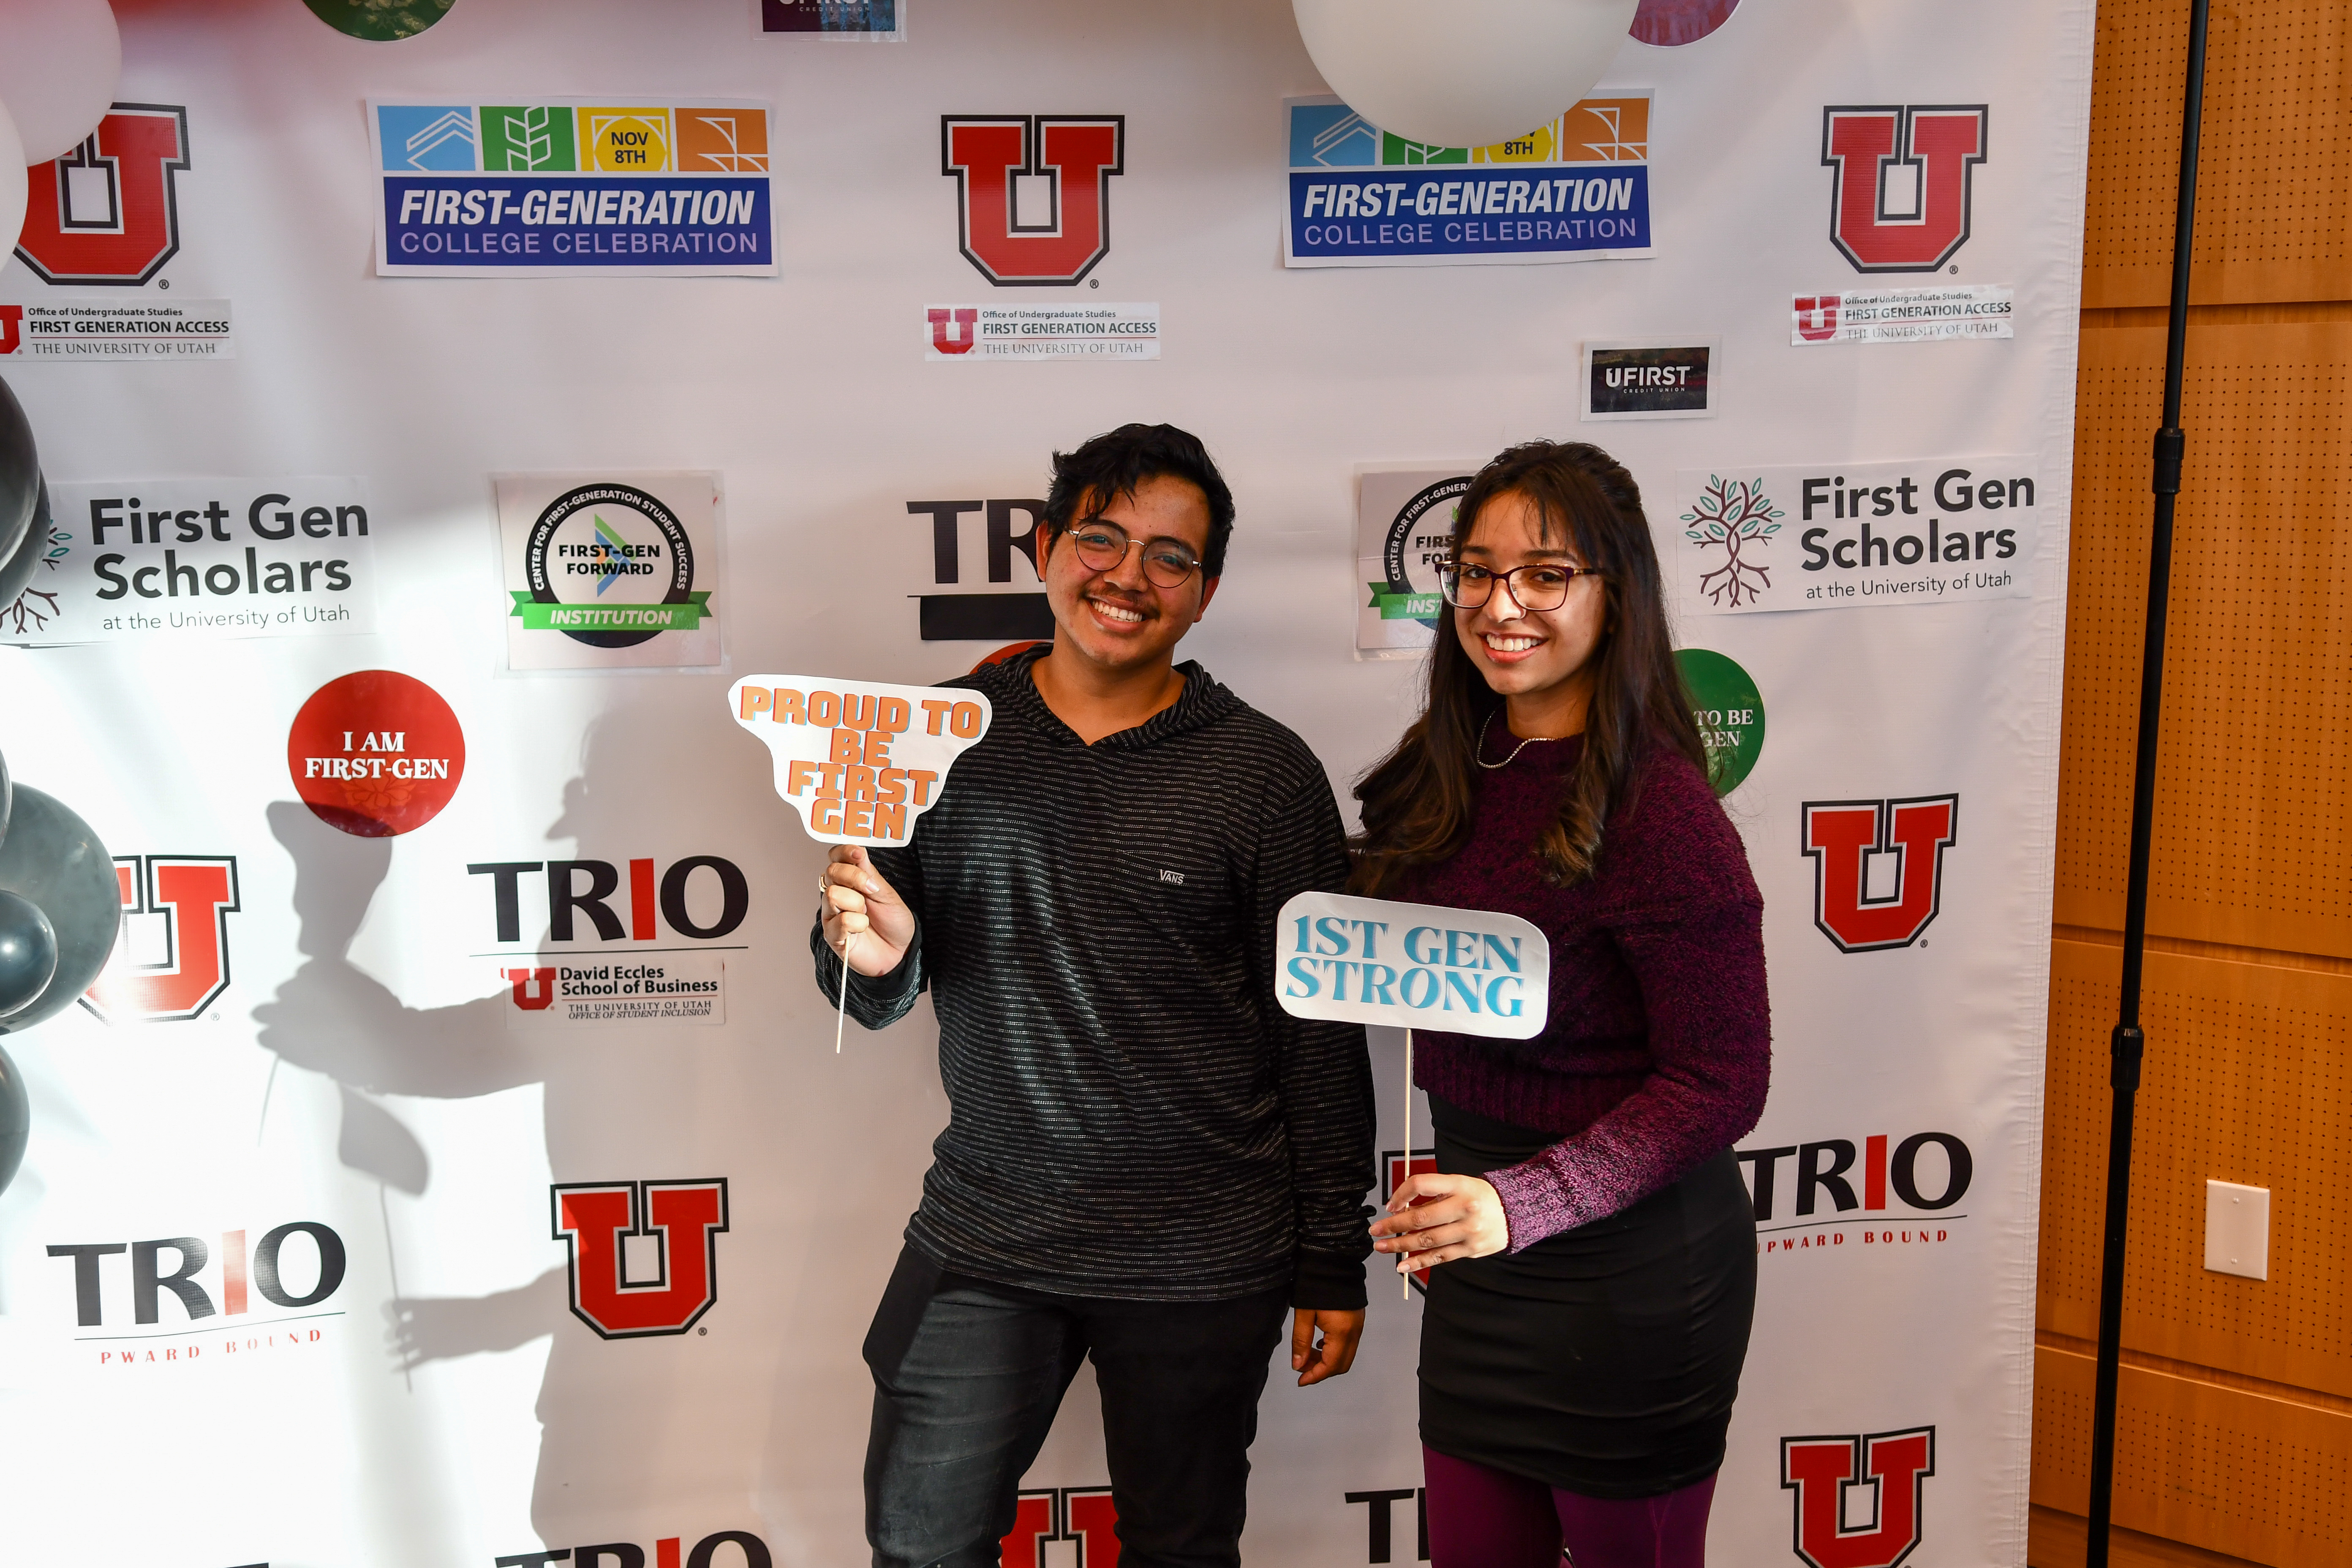 Students posing with step and repeat wall at University of Utah